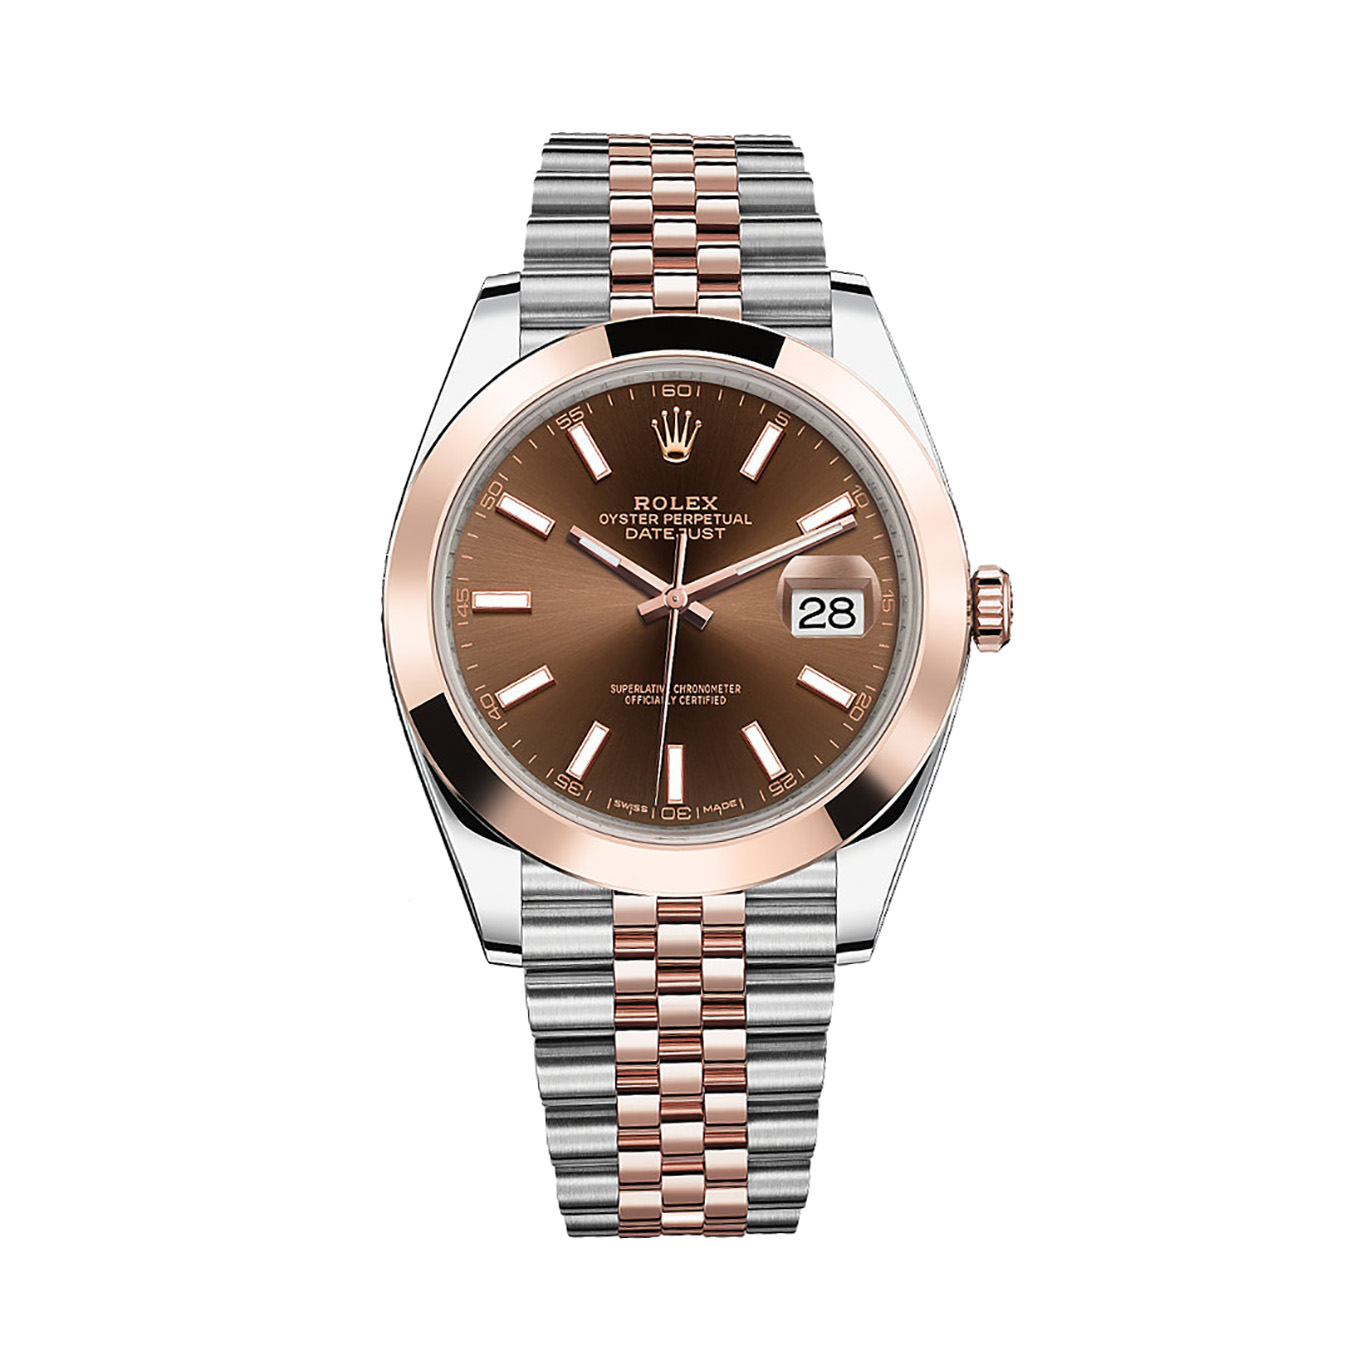 Datejust 41 126301 Rose Gold & Stainless Steel Watch (Chocolate)